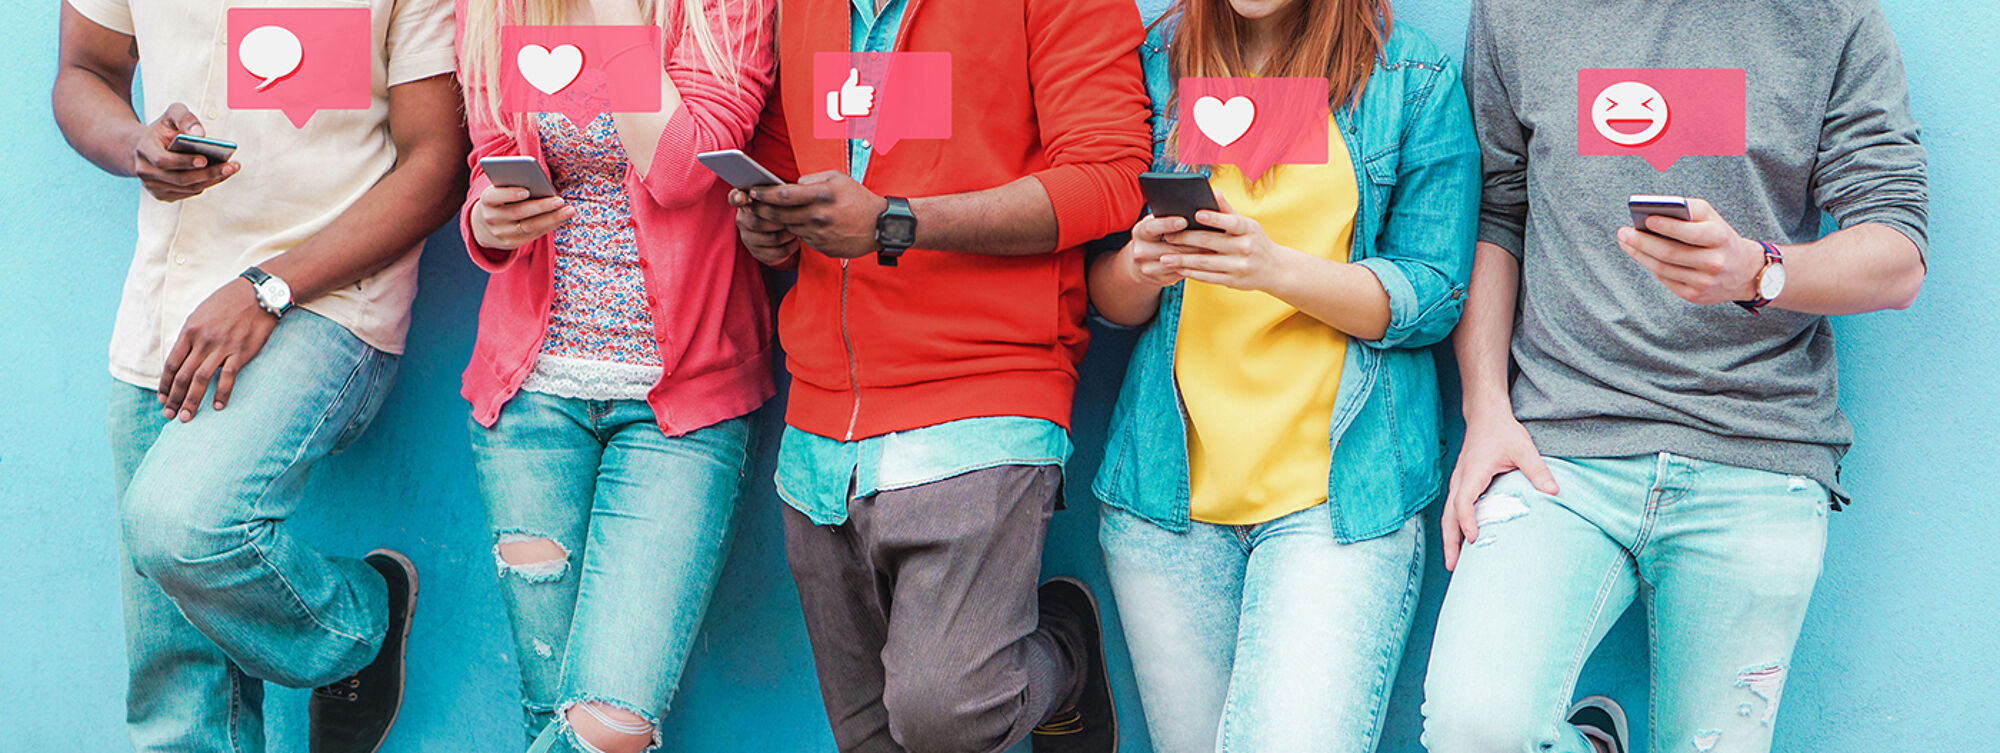 Young people standing in a row wearing bright clothes looking at social media on their mobile phones